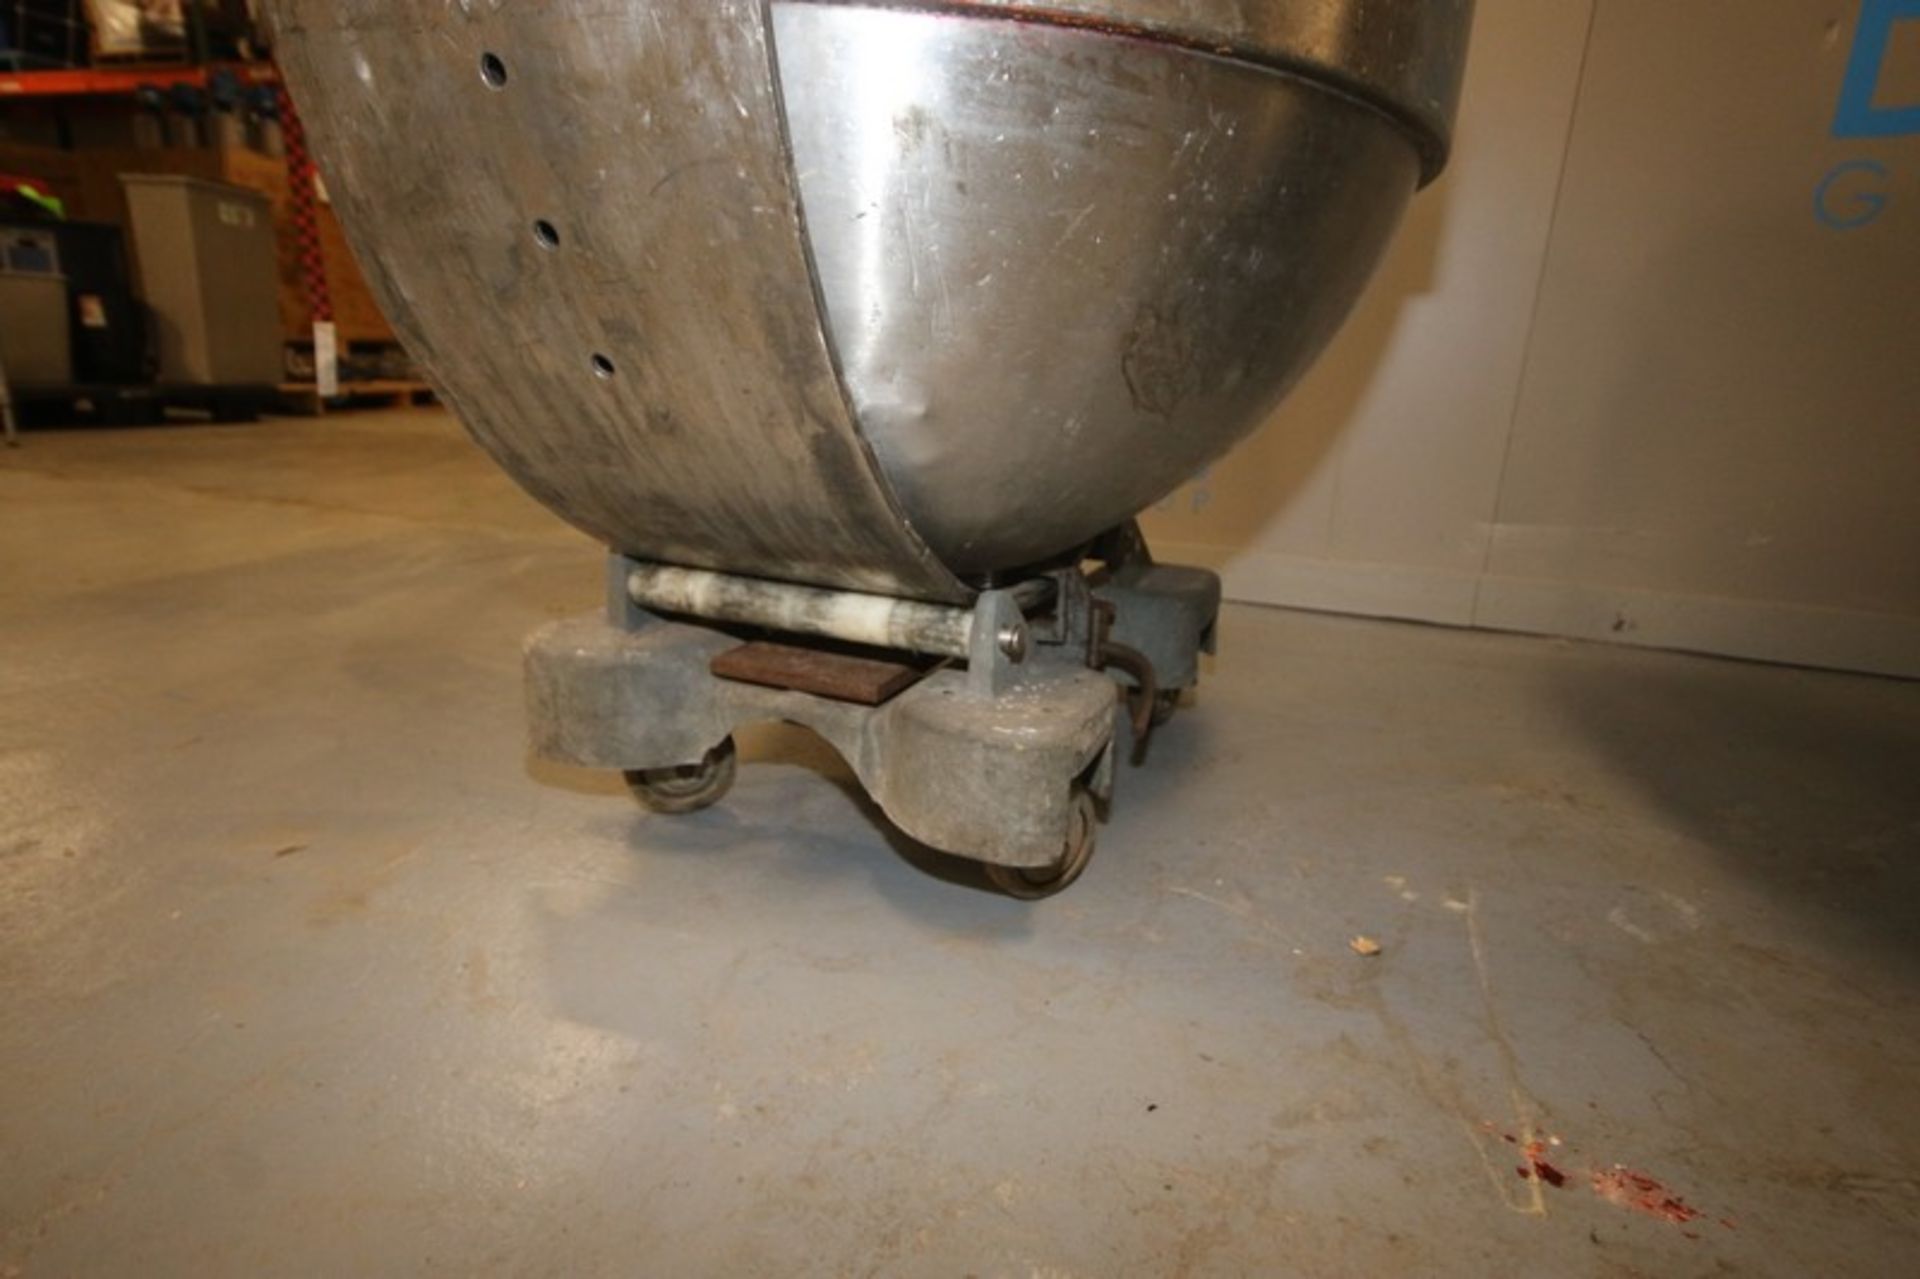 S/S Mixing Bowl, Internal Dims.:  Aprox. 32-1/2" Dia. x 26-1/2" Deep, Mounted on Portable Cart ( - Image 5 of 8